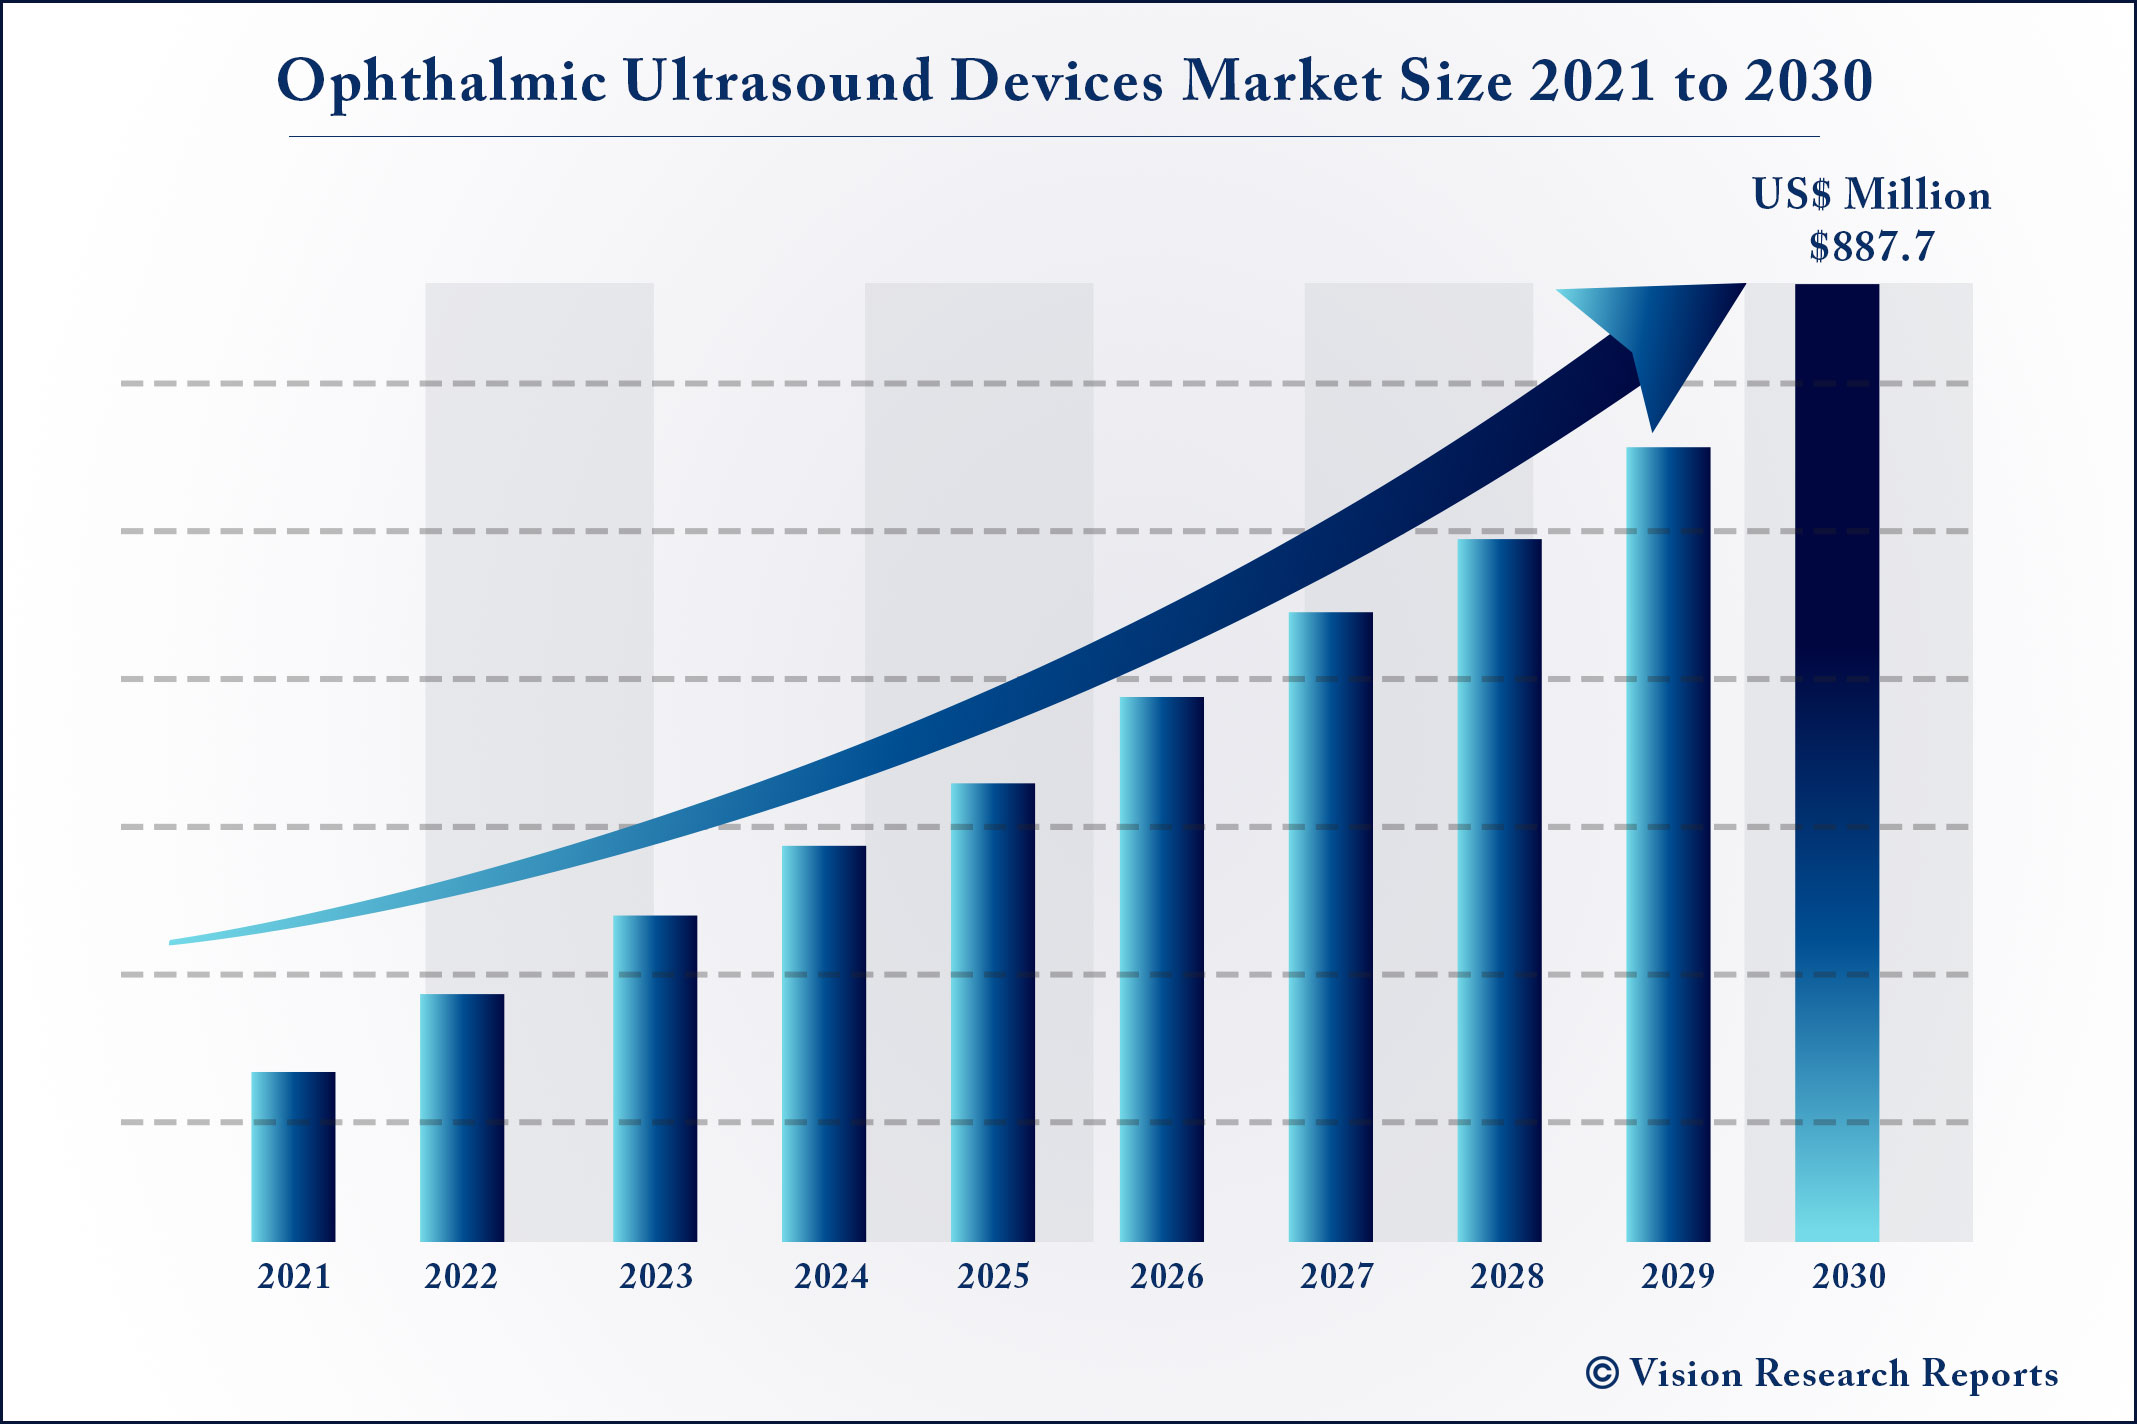 Ophthalmic Ultrasound Devices Market Size 2021 to 2030